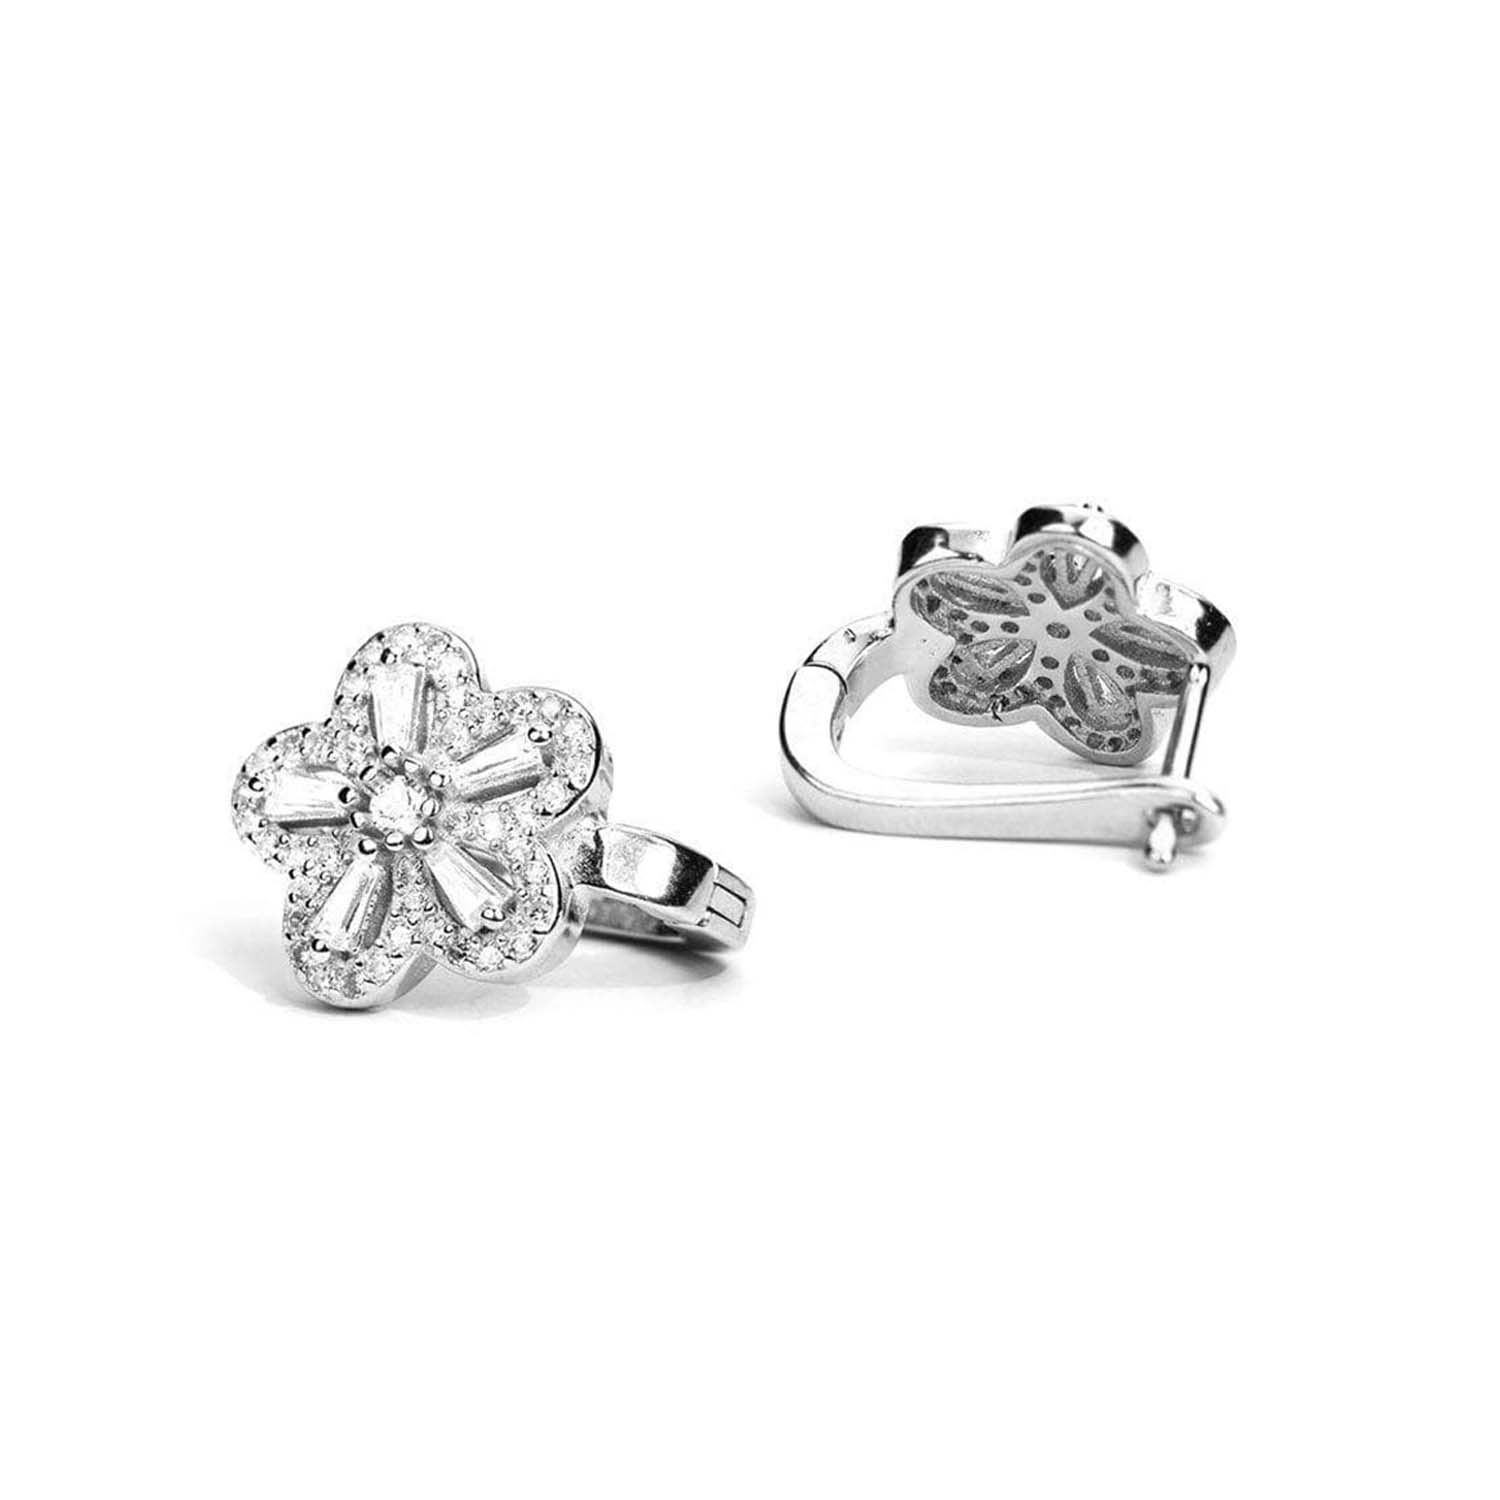 Blooming Harmony Floral 925 Silver Jewellery Set